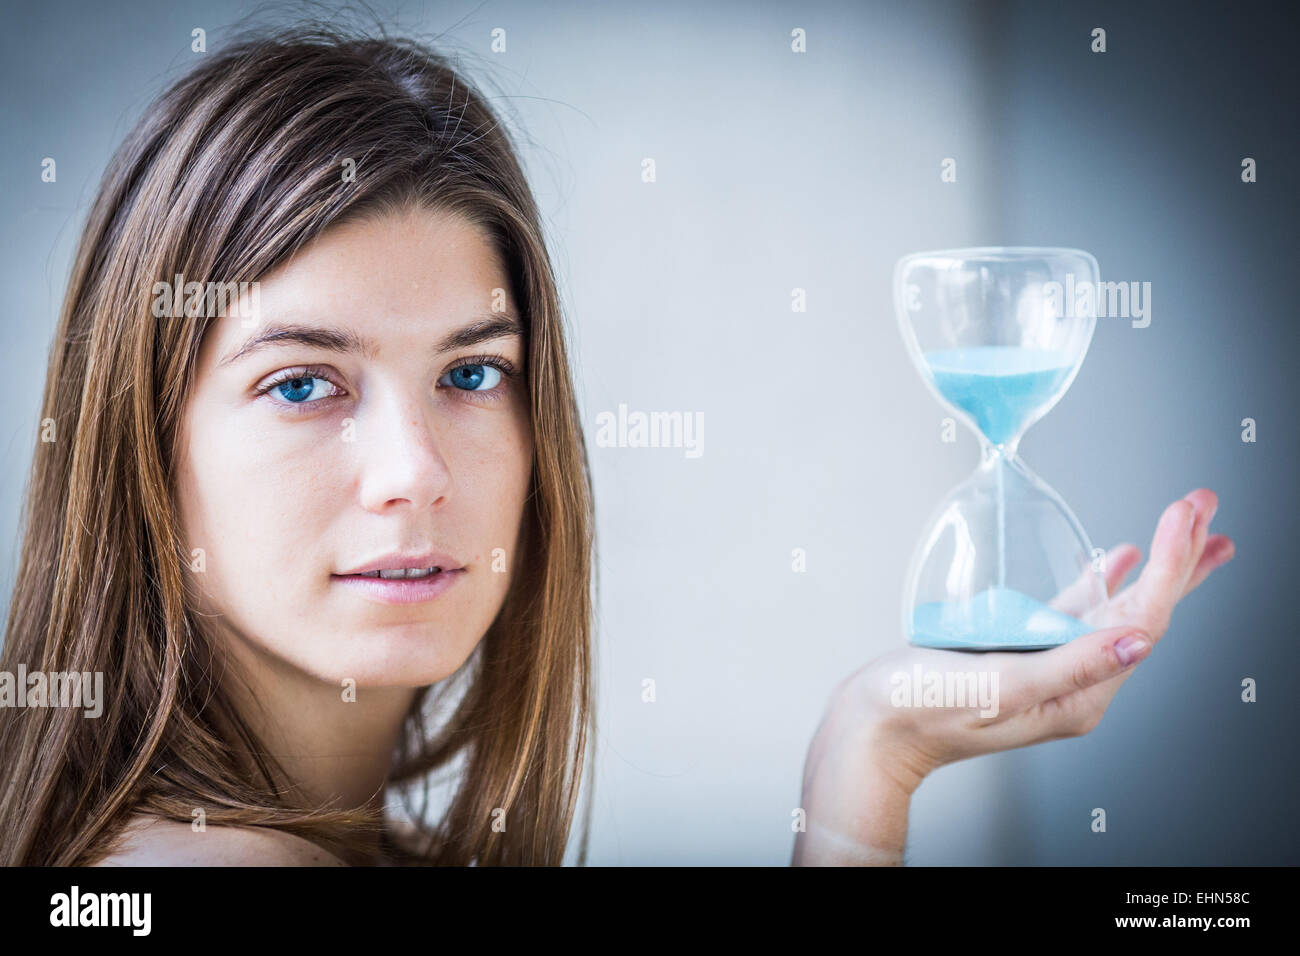 Woman holding an hourglass. Stock Photo